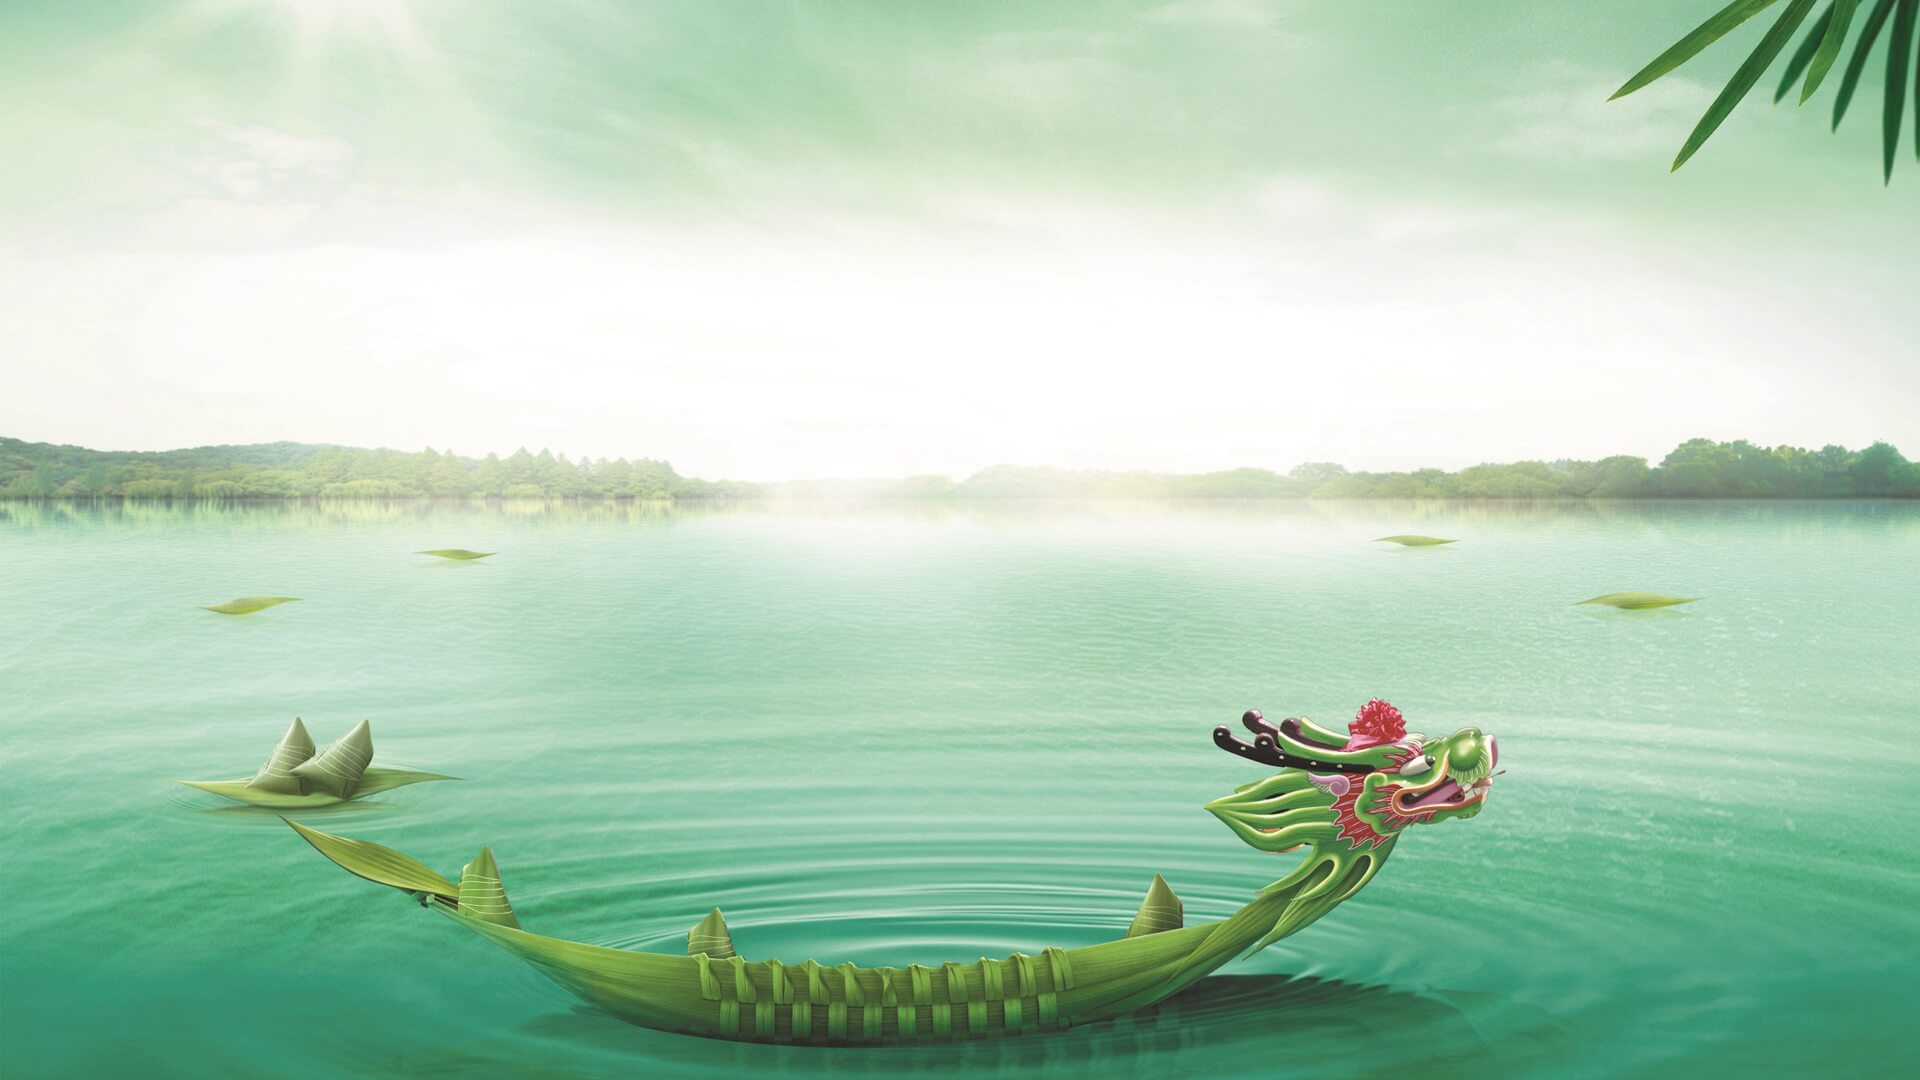 When is the Dragon Boat Festival? How is Dragon Boat Festival celebrated?